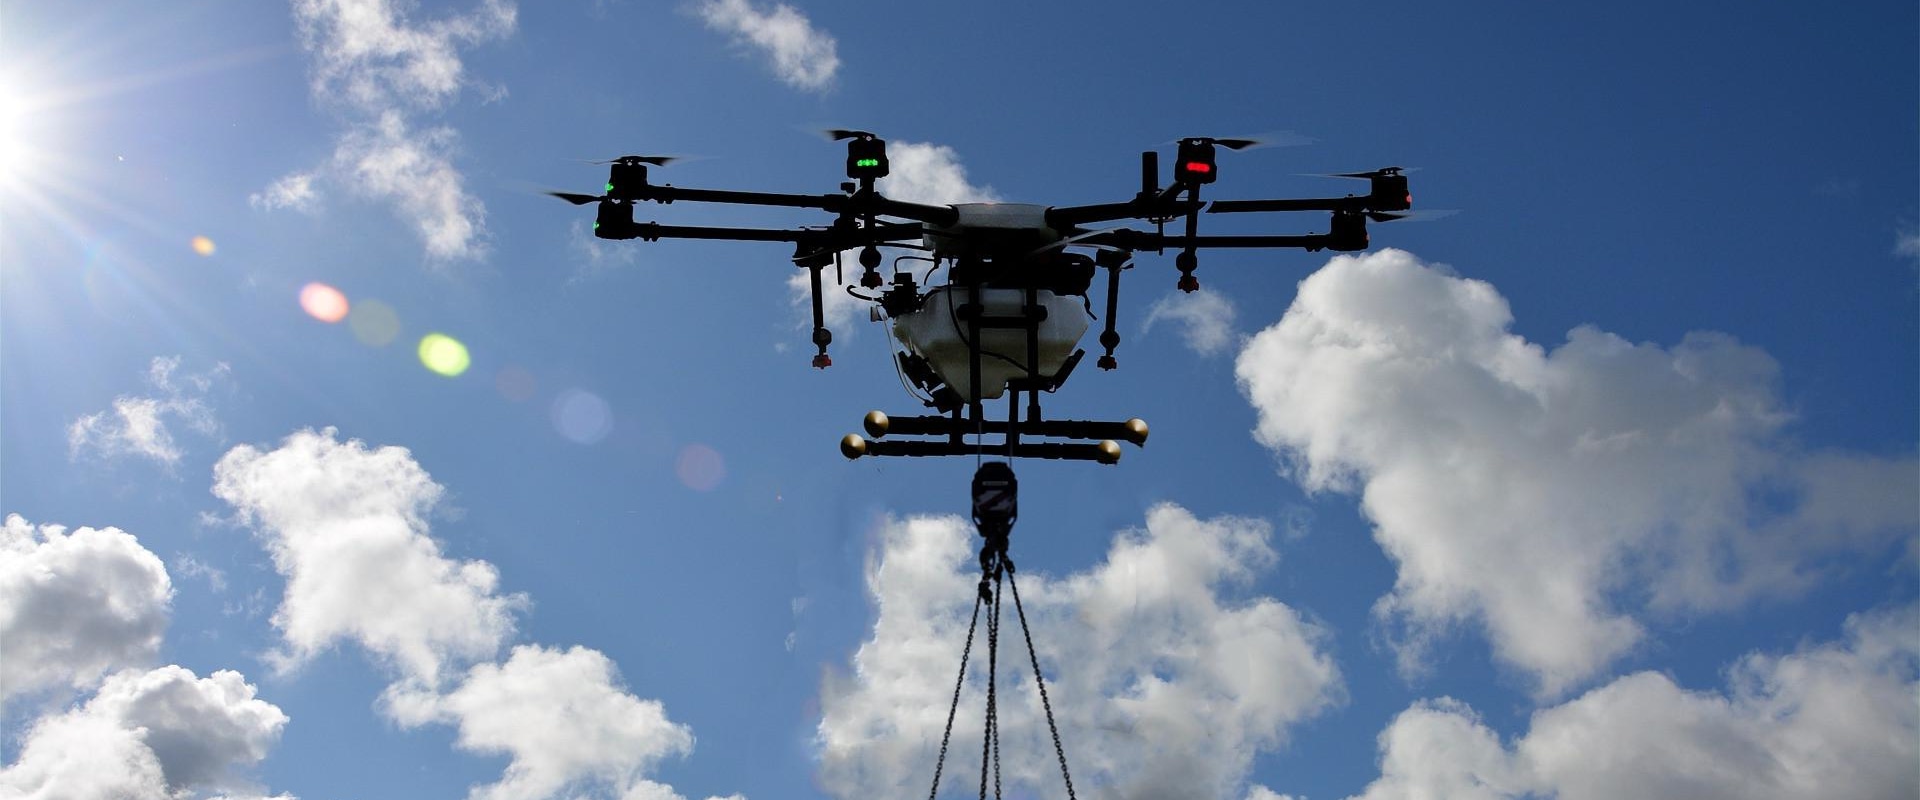 What is the largest drone you can buy without a license?